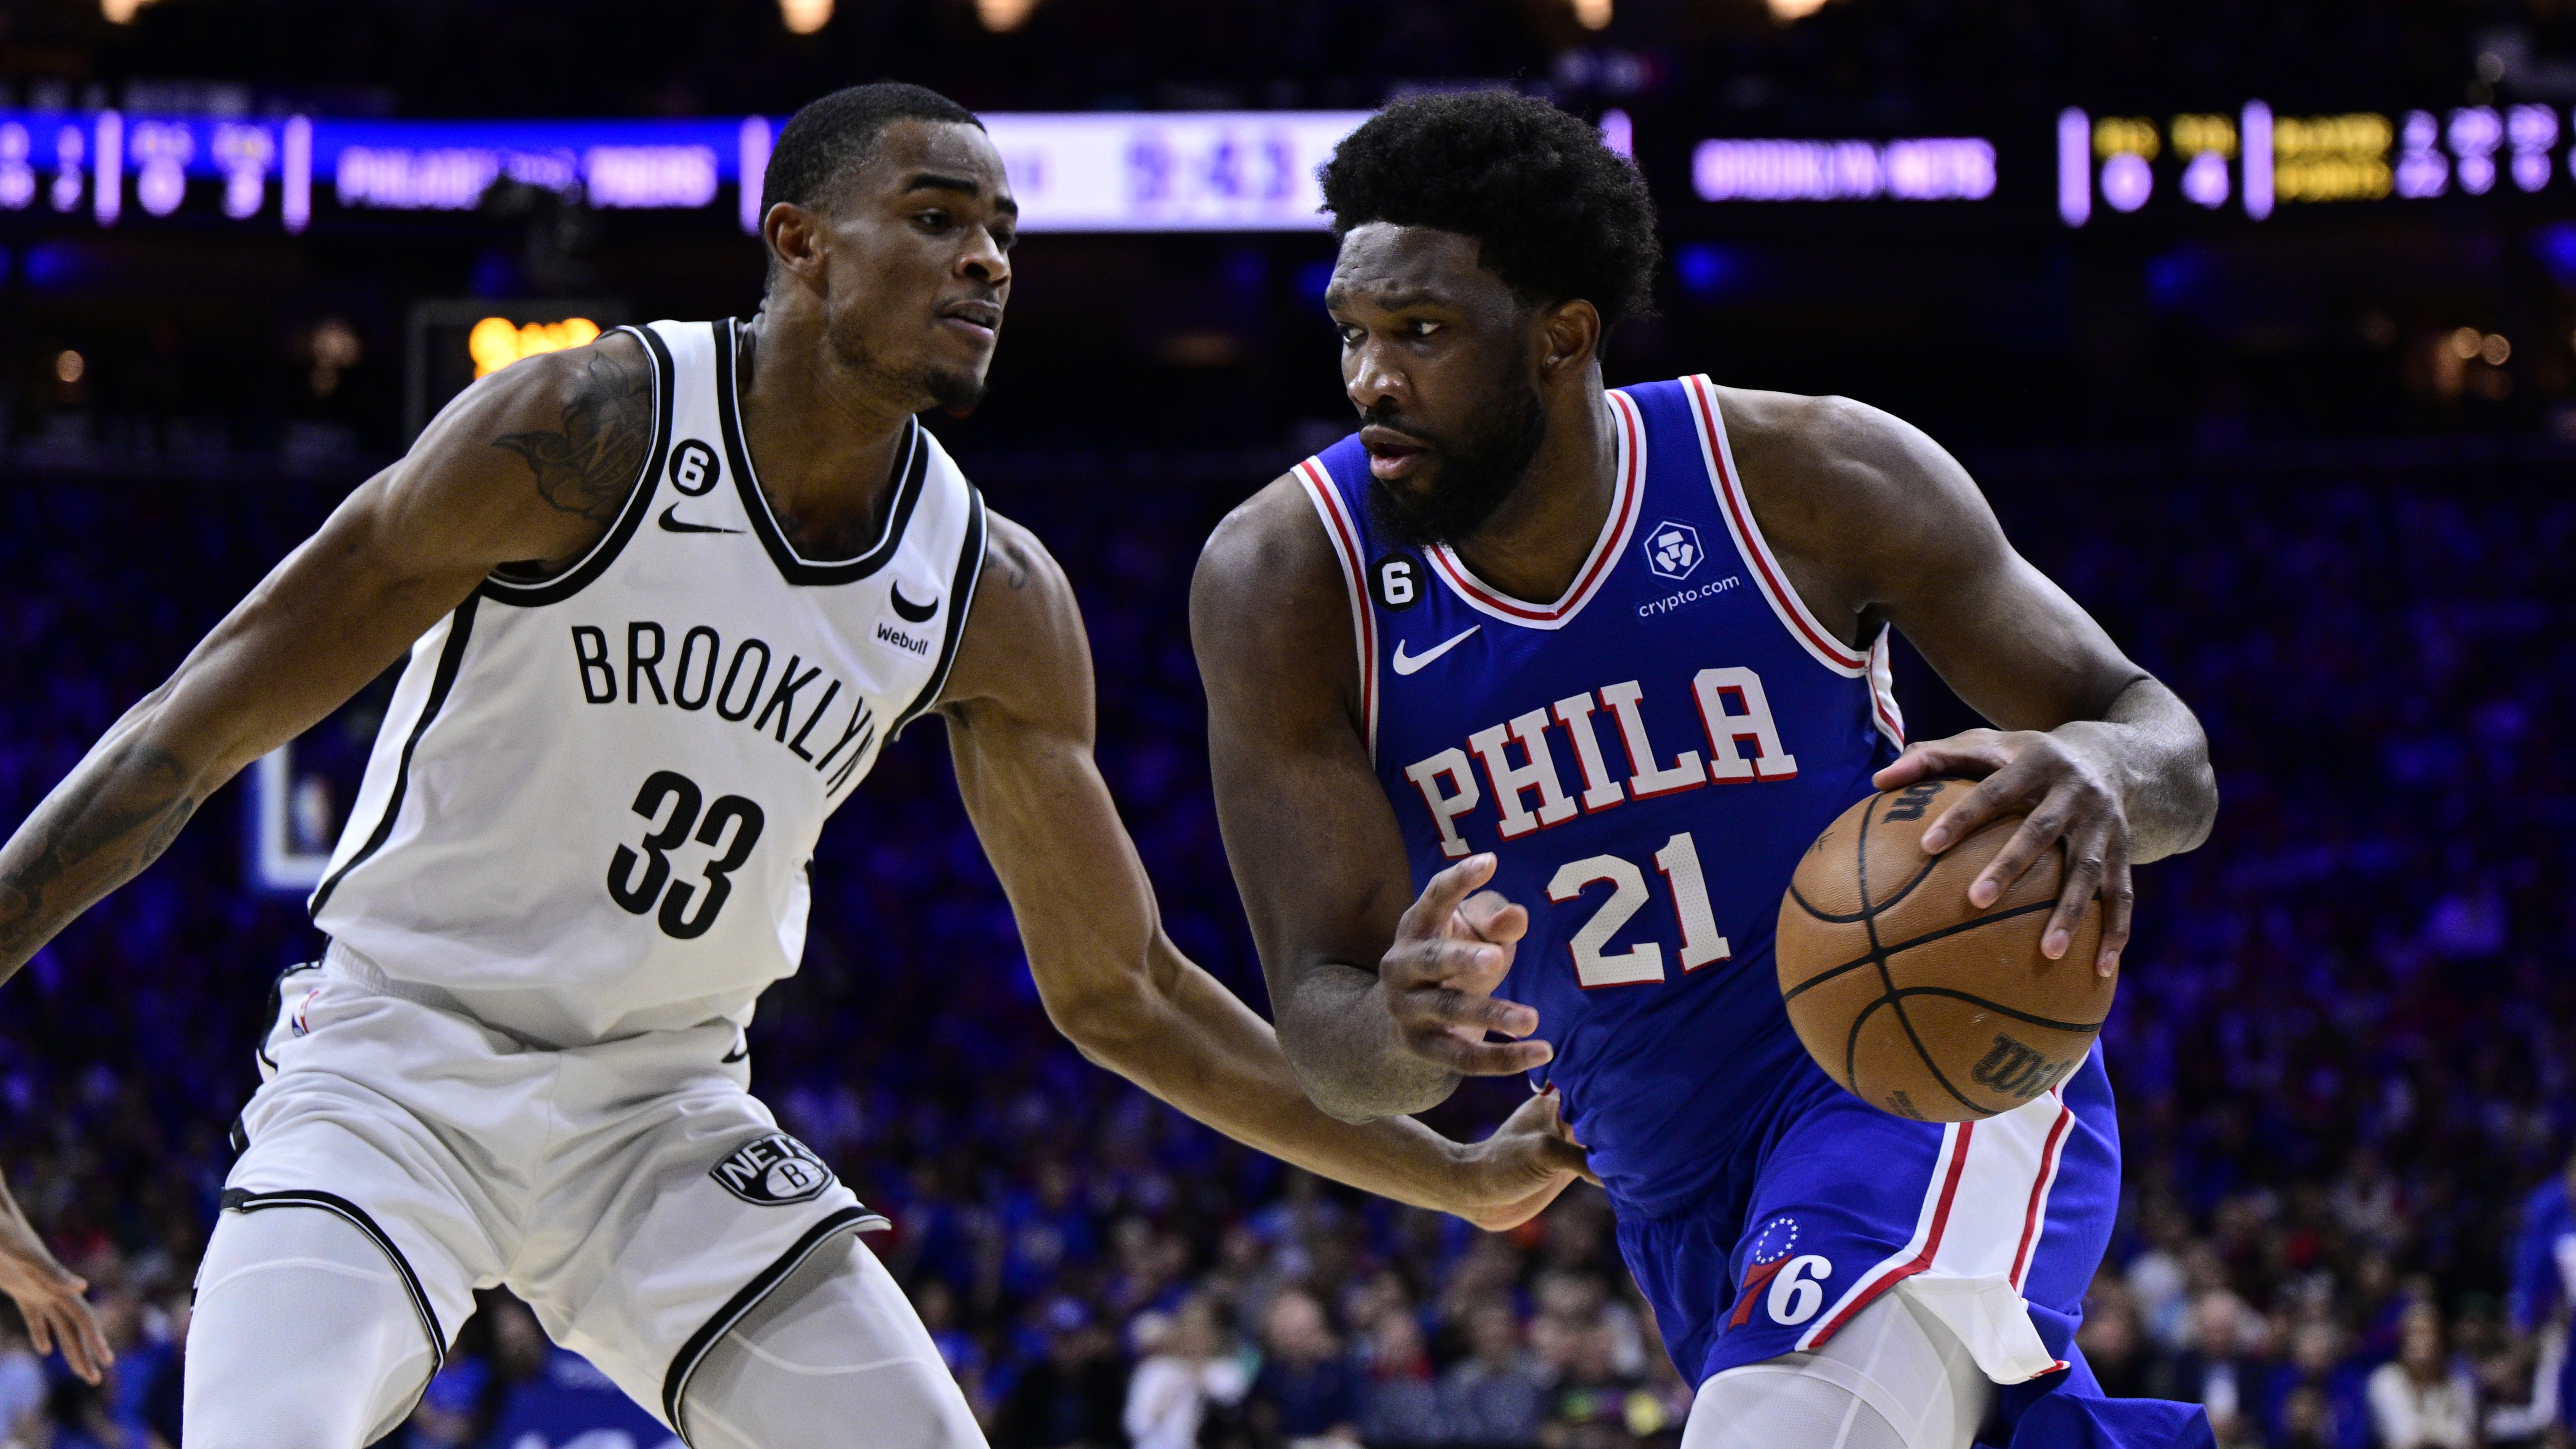 Philadelphia 76ers at Brooklyn Nets free live stream How to watch, time, channel, odds